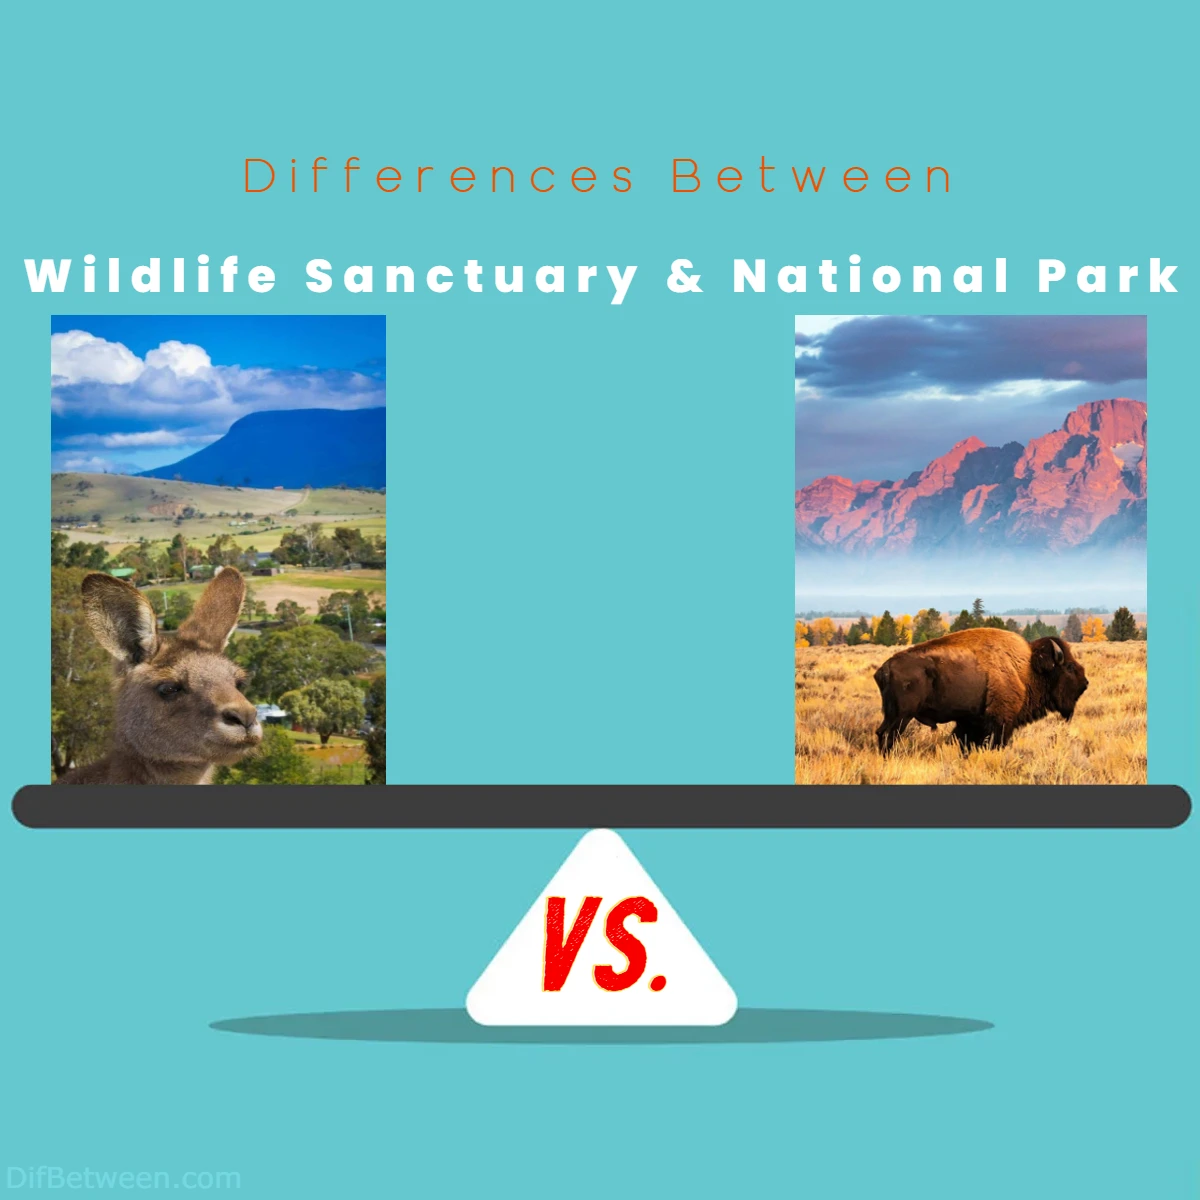 Differences Between Wildlife Sanctuary vs National Park